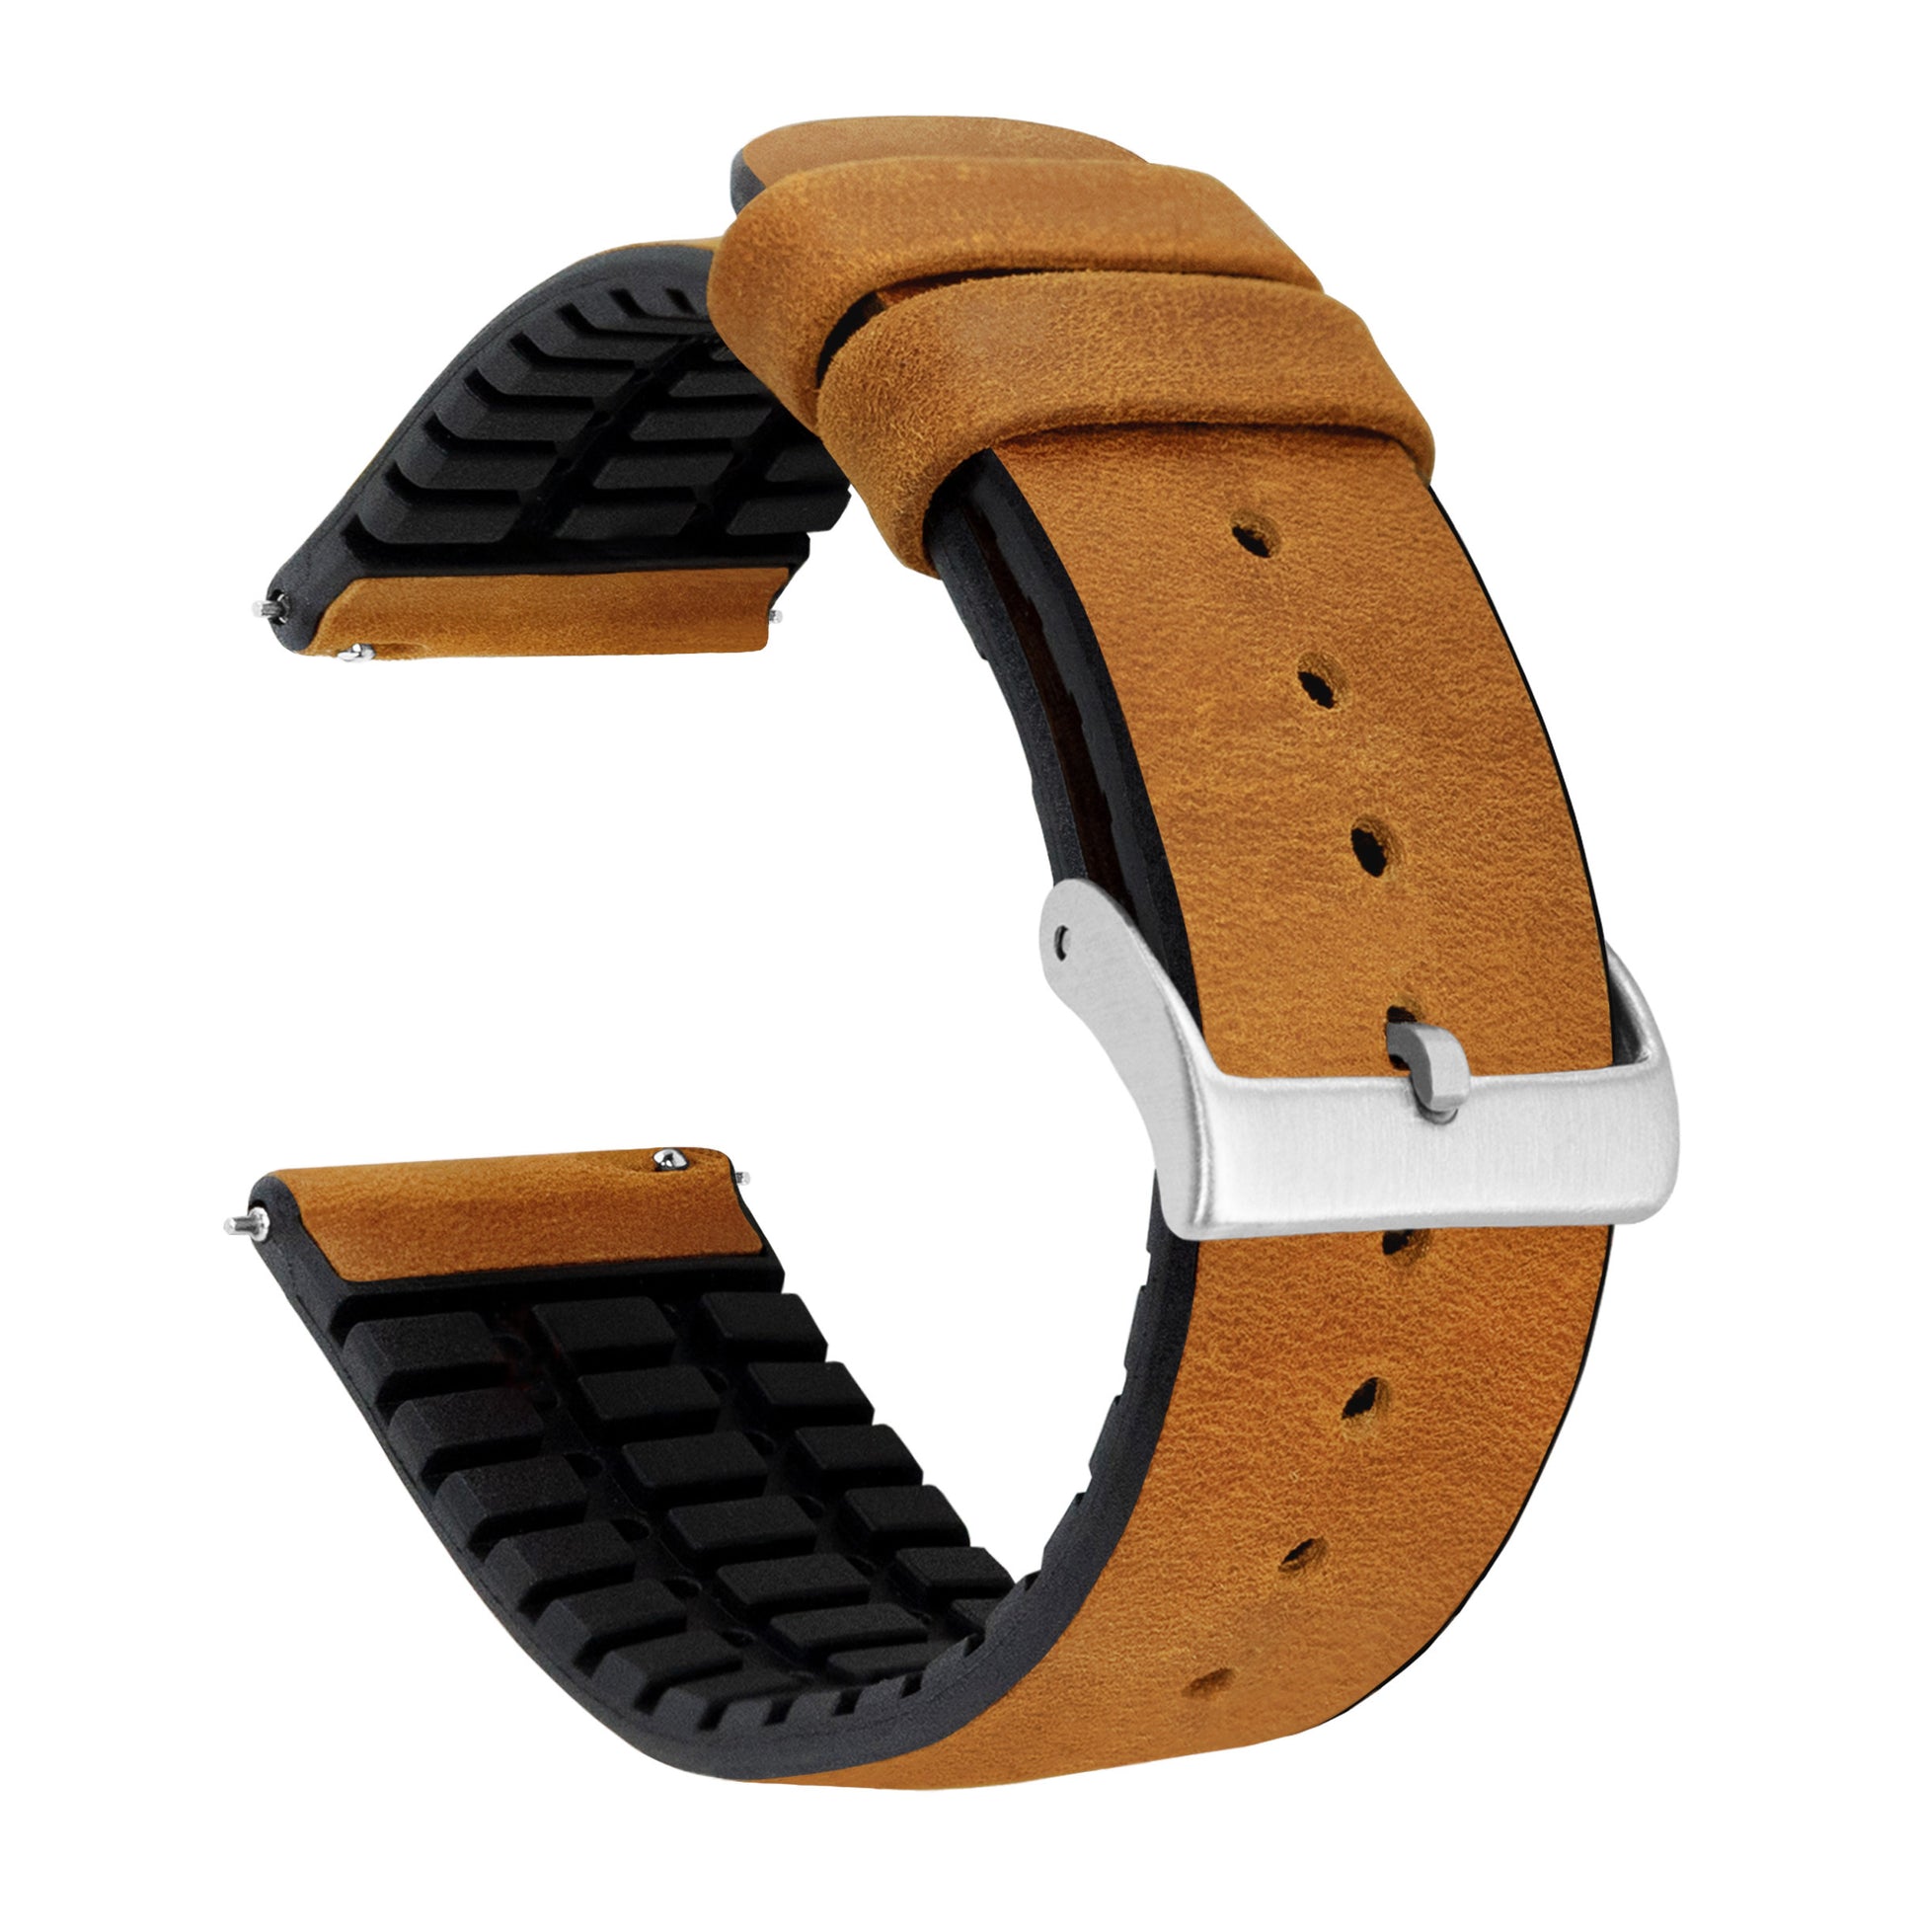 Samsung Galaxy Watch Active | Leather and Rubber Hybrid | Cedar Brown - Barton Watch Bands